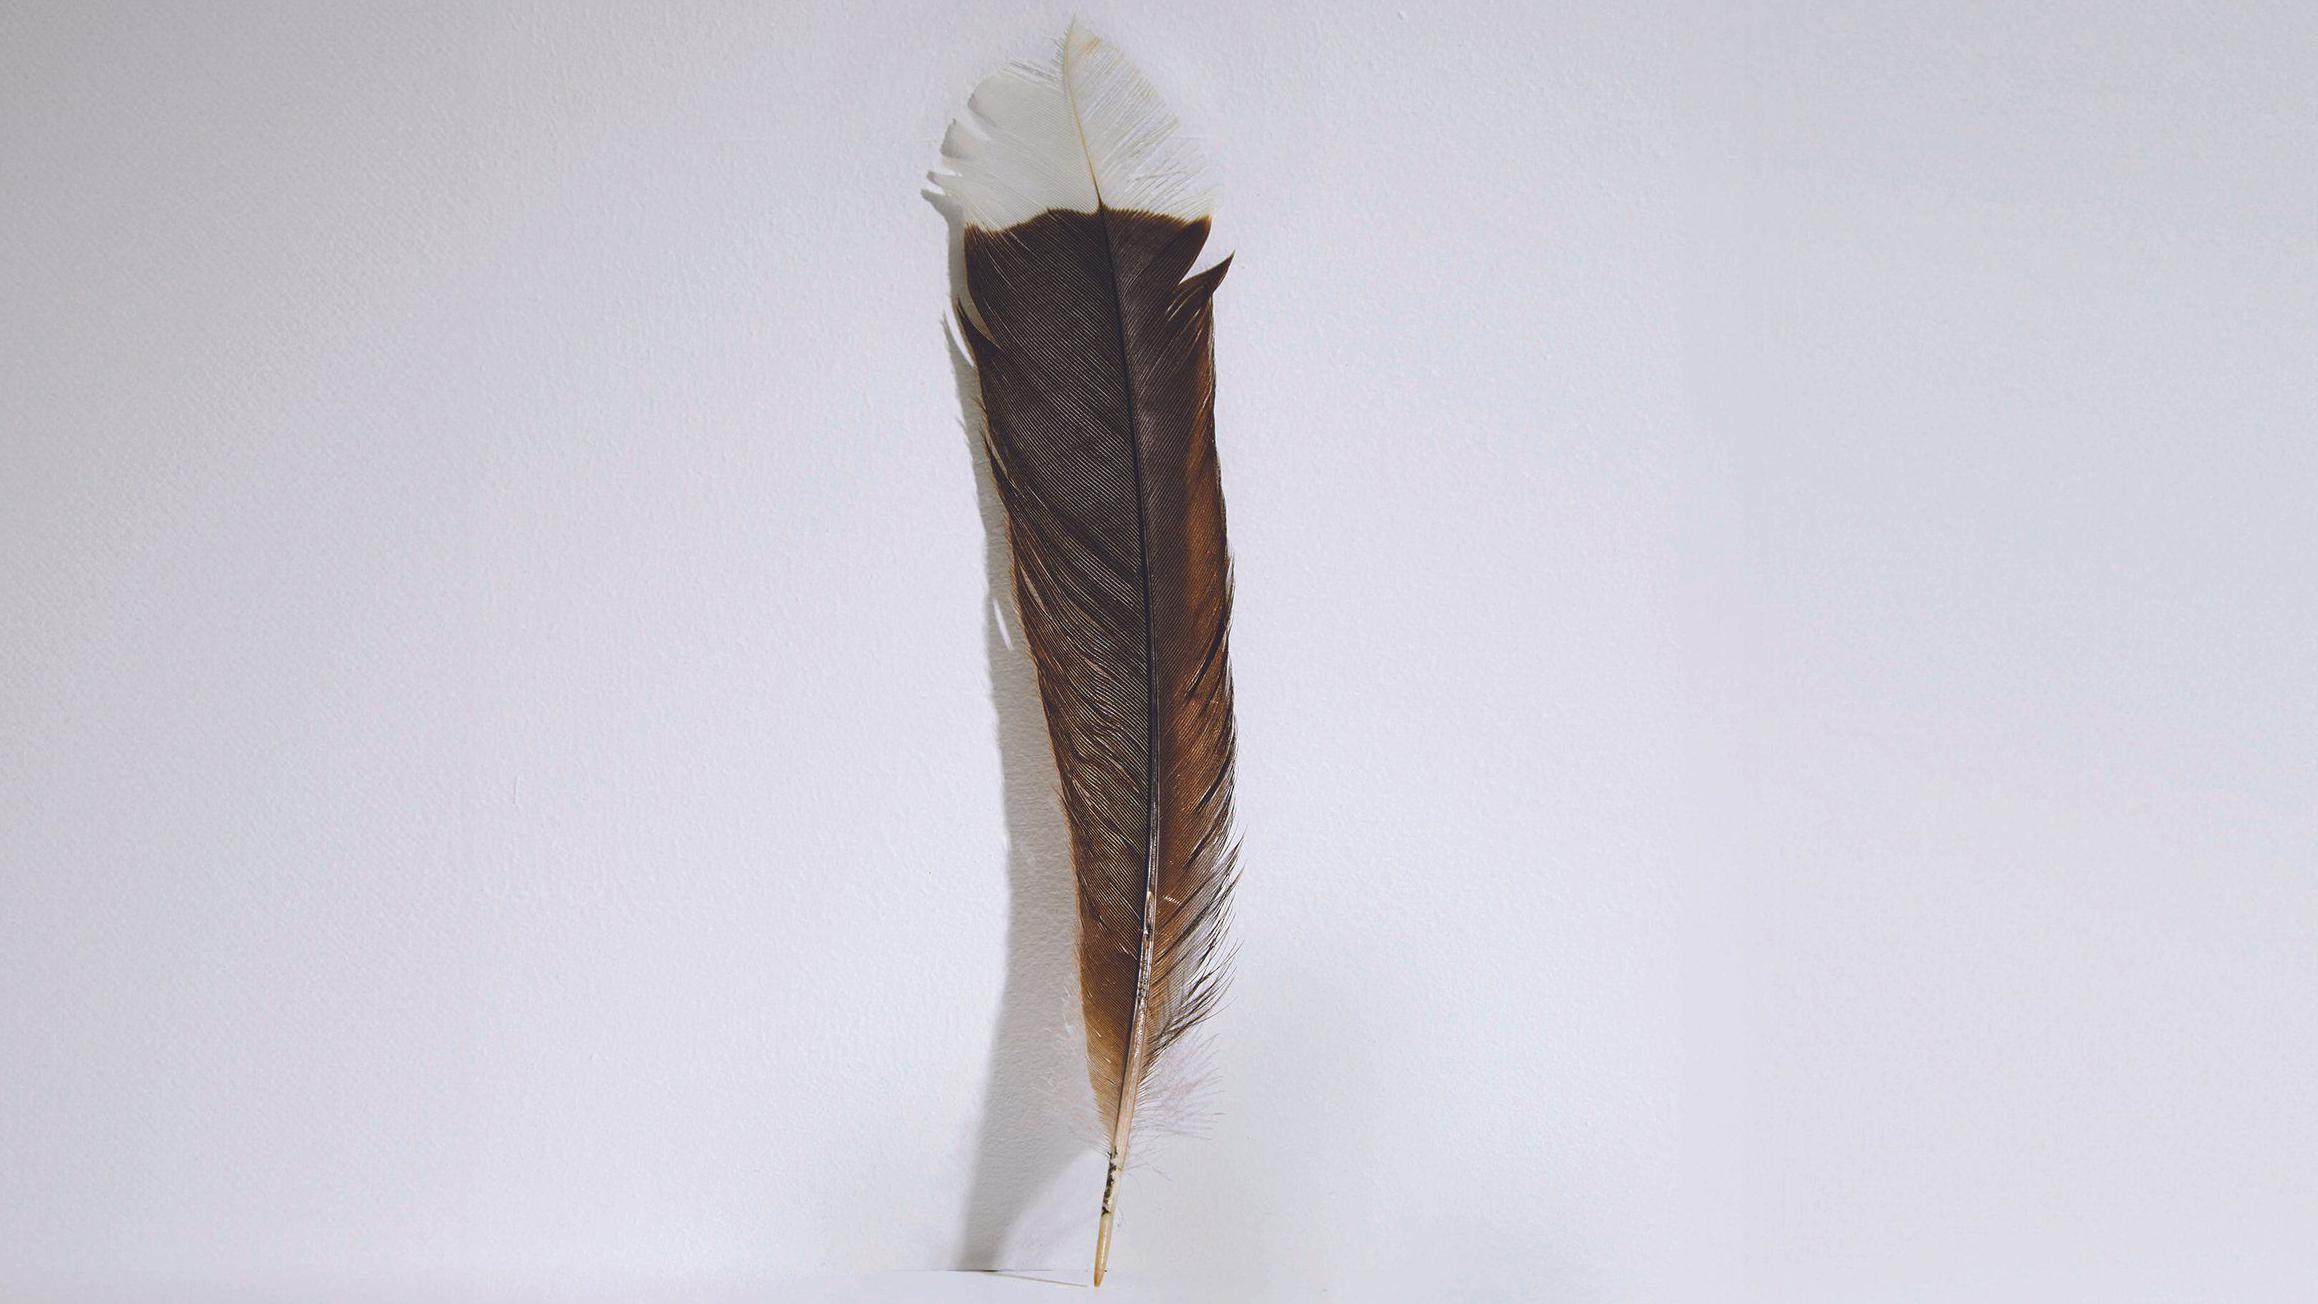 Worlds most expensive feather sold at auction